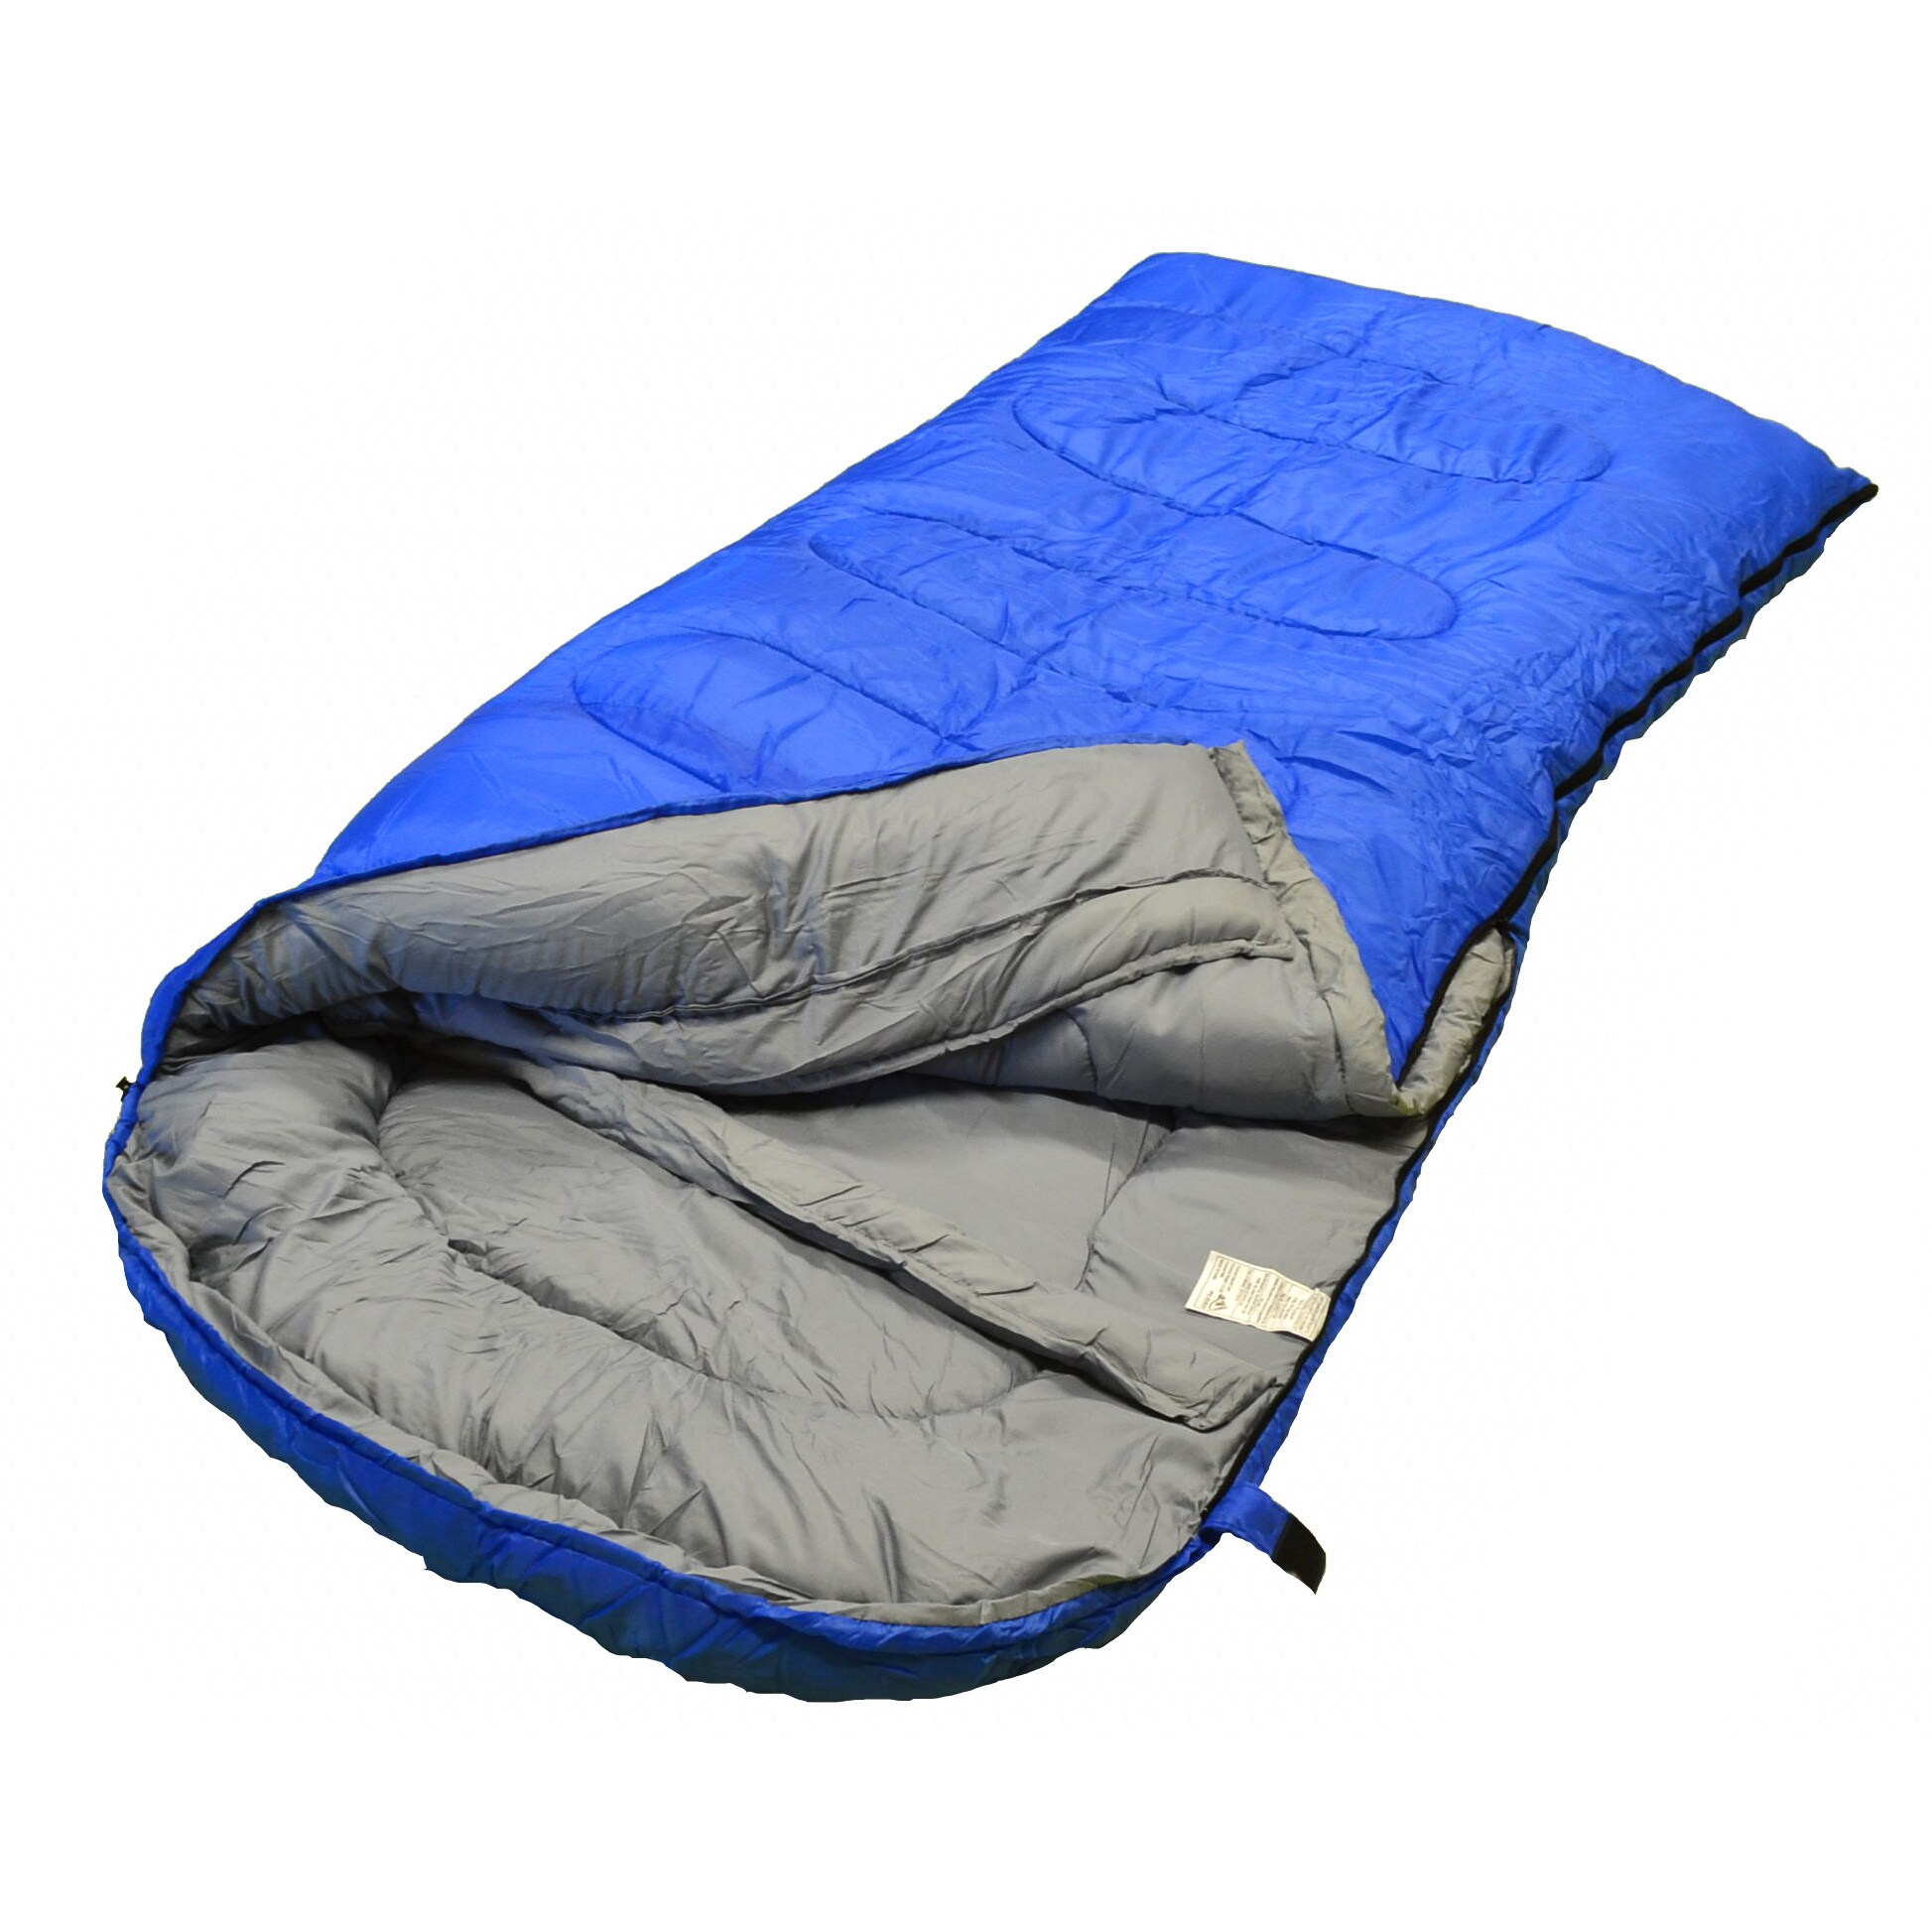 Big River Outdoors Rapid Ripstop 0 degree Oversized Sleeping Bag (BlackMaterials NylonDimensions 90.5 inches long x 40 inches wideModel 10001 )